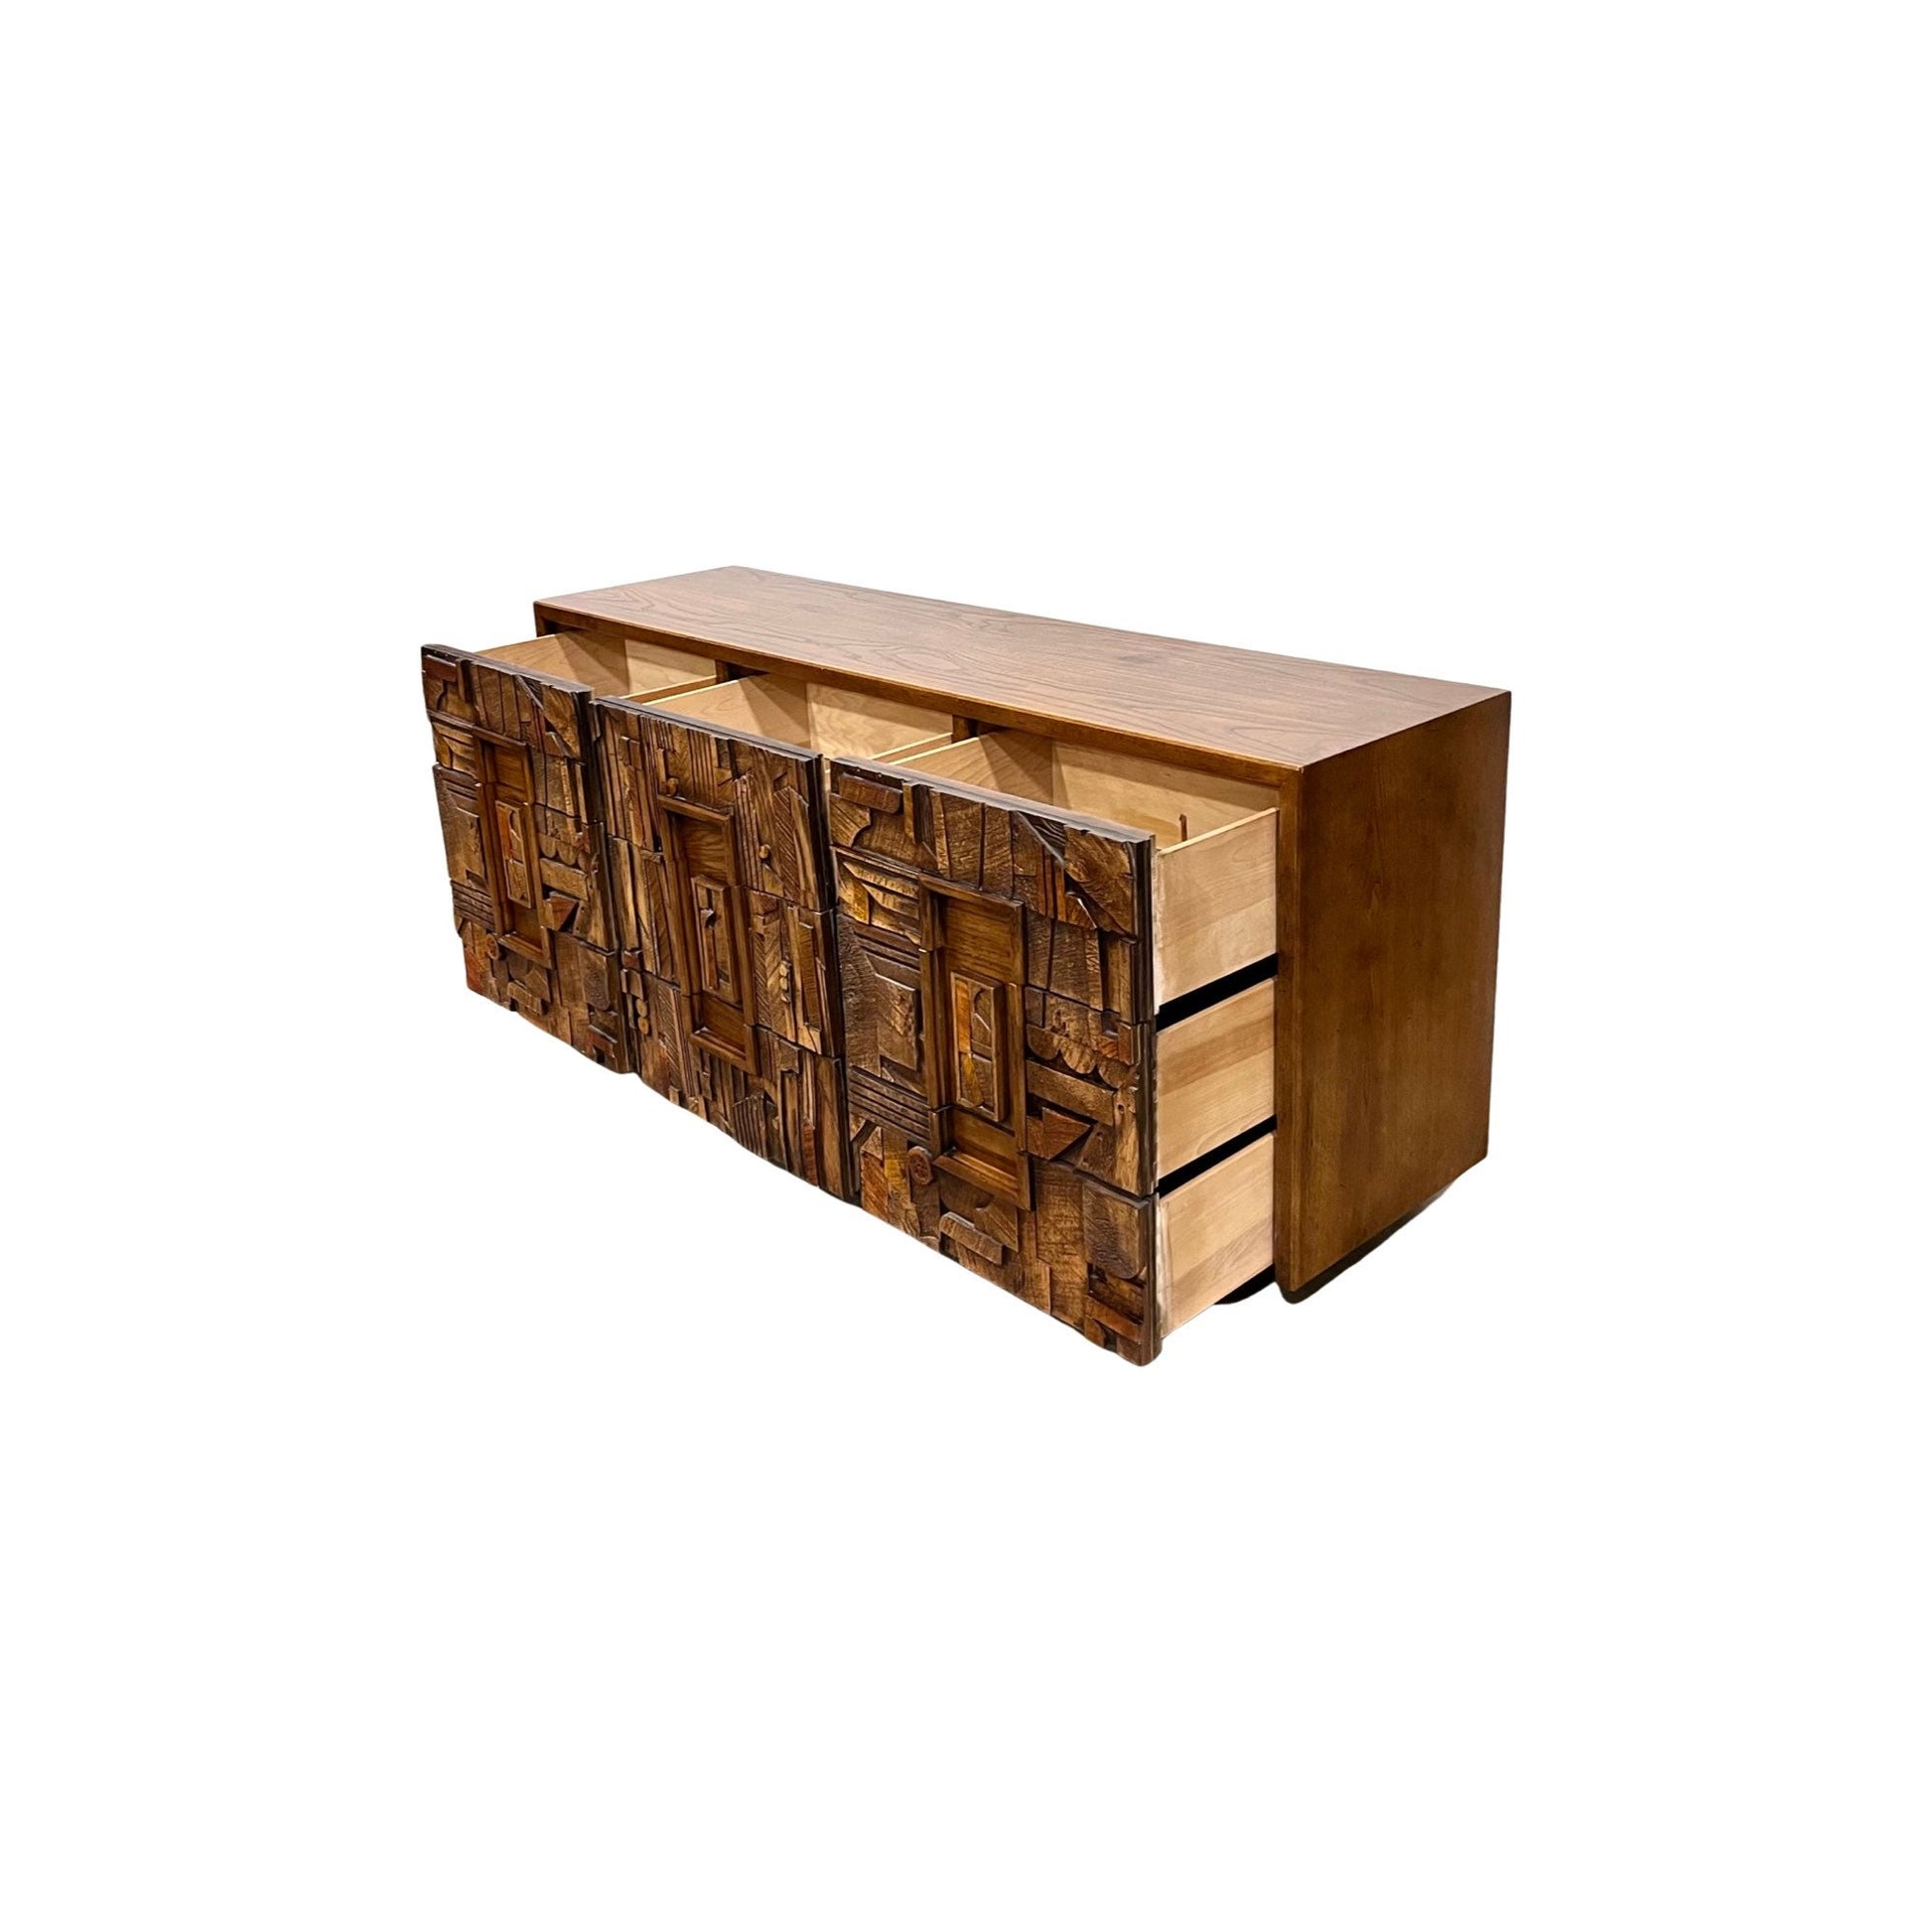 High-quality lowboy dresser with a distinctive southwestern-style brutalist pattern on all nine drawers, built to last with exceptional attention to detail and craftsmanship.